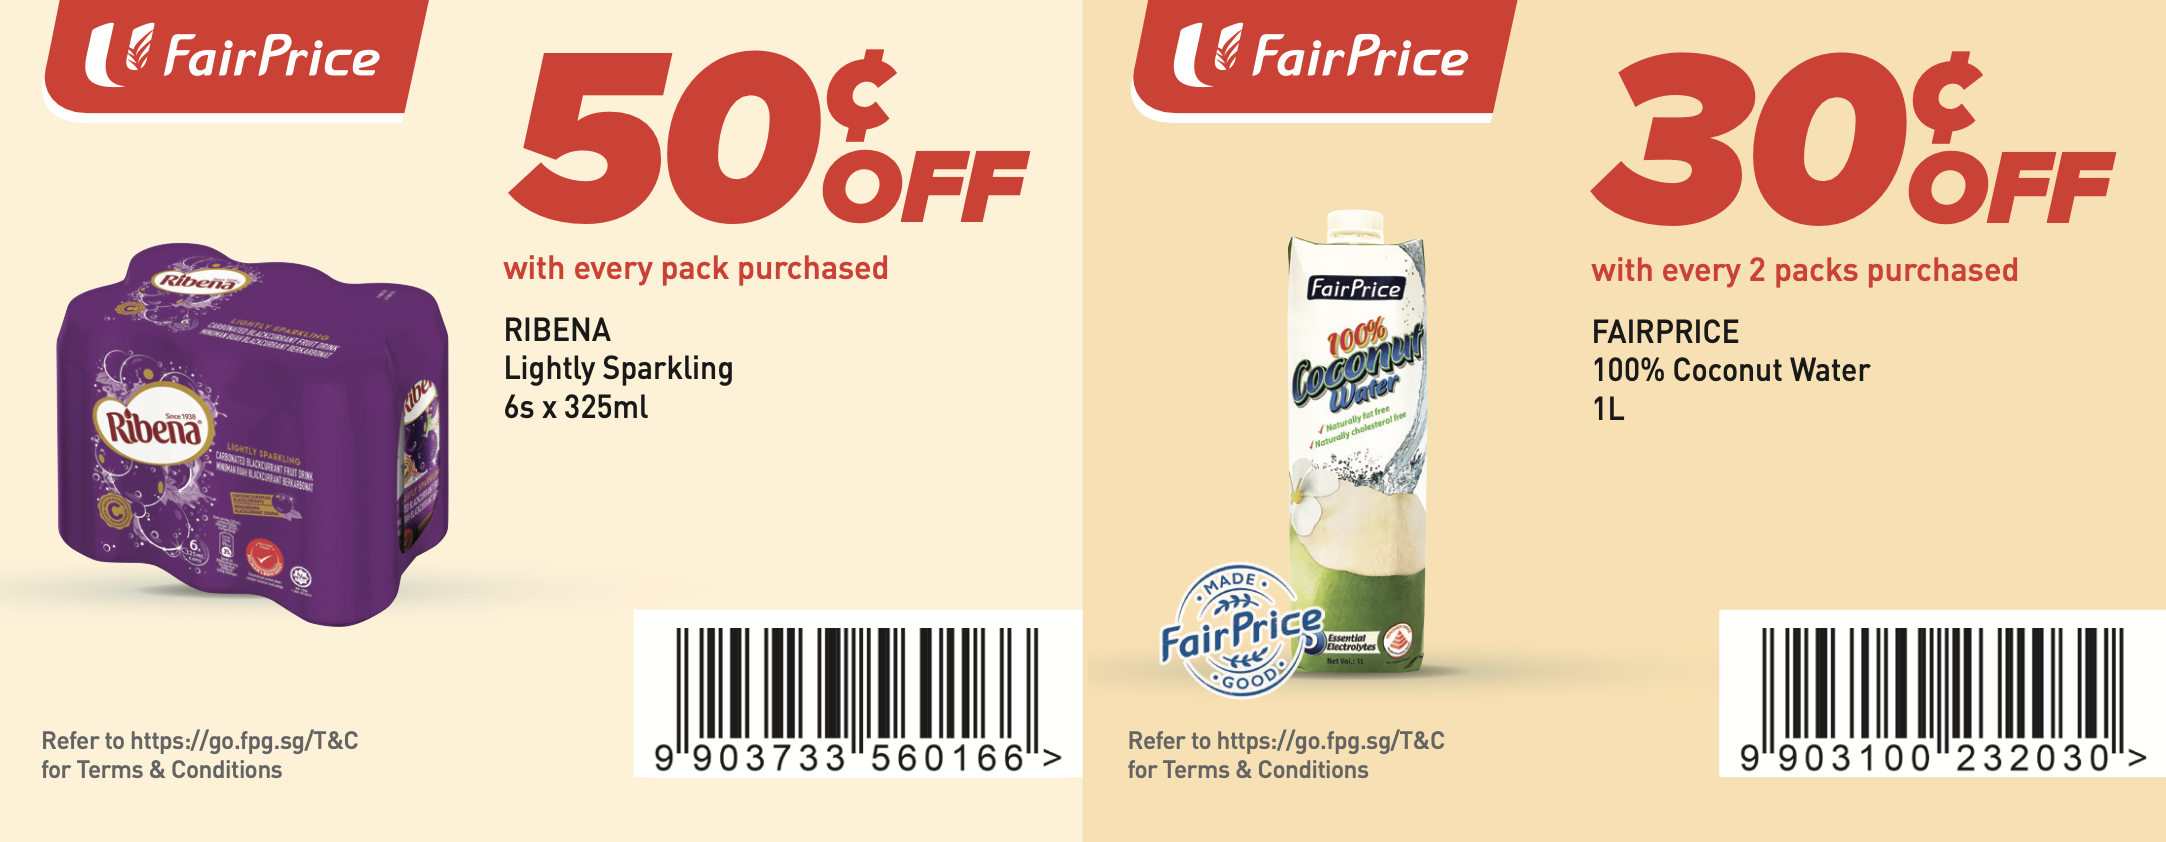 A carton of milk with a barcode

Description automatically generated with low confidence